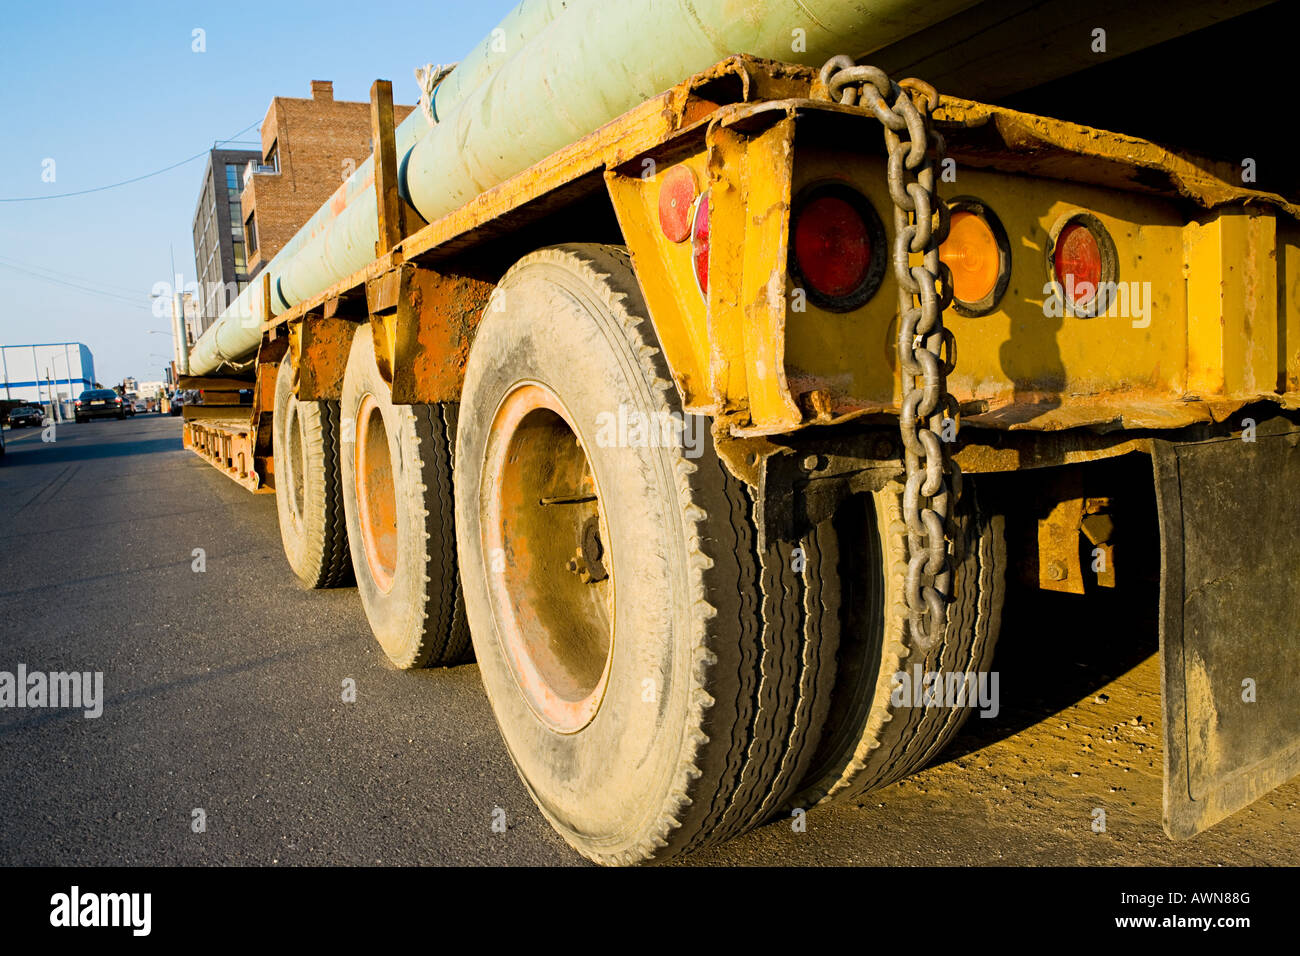 Truck with water pipes Stock Photo